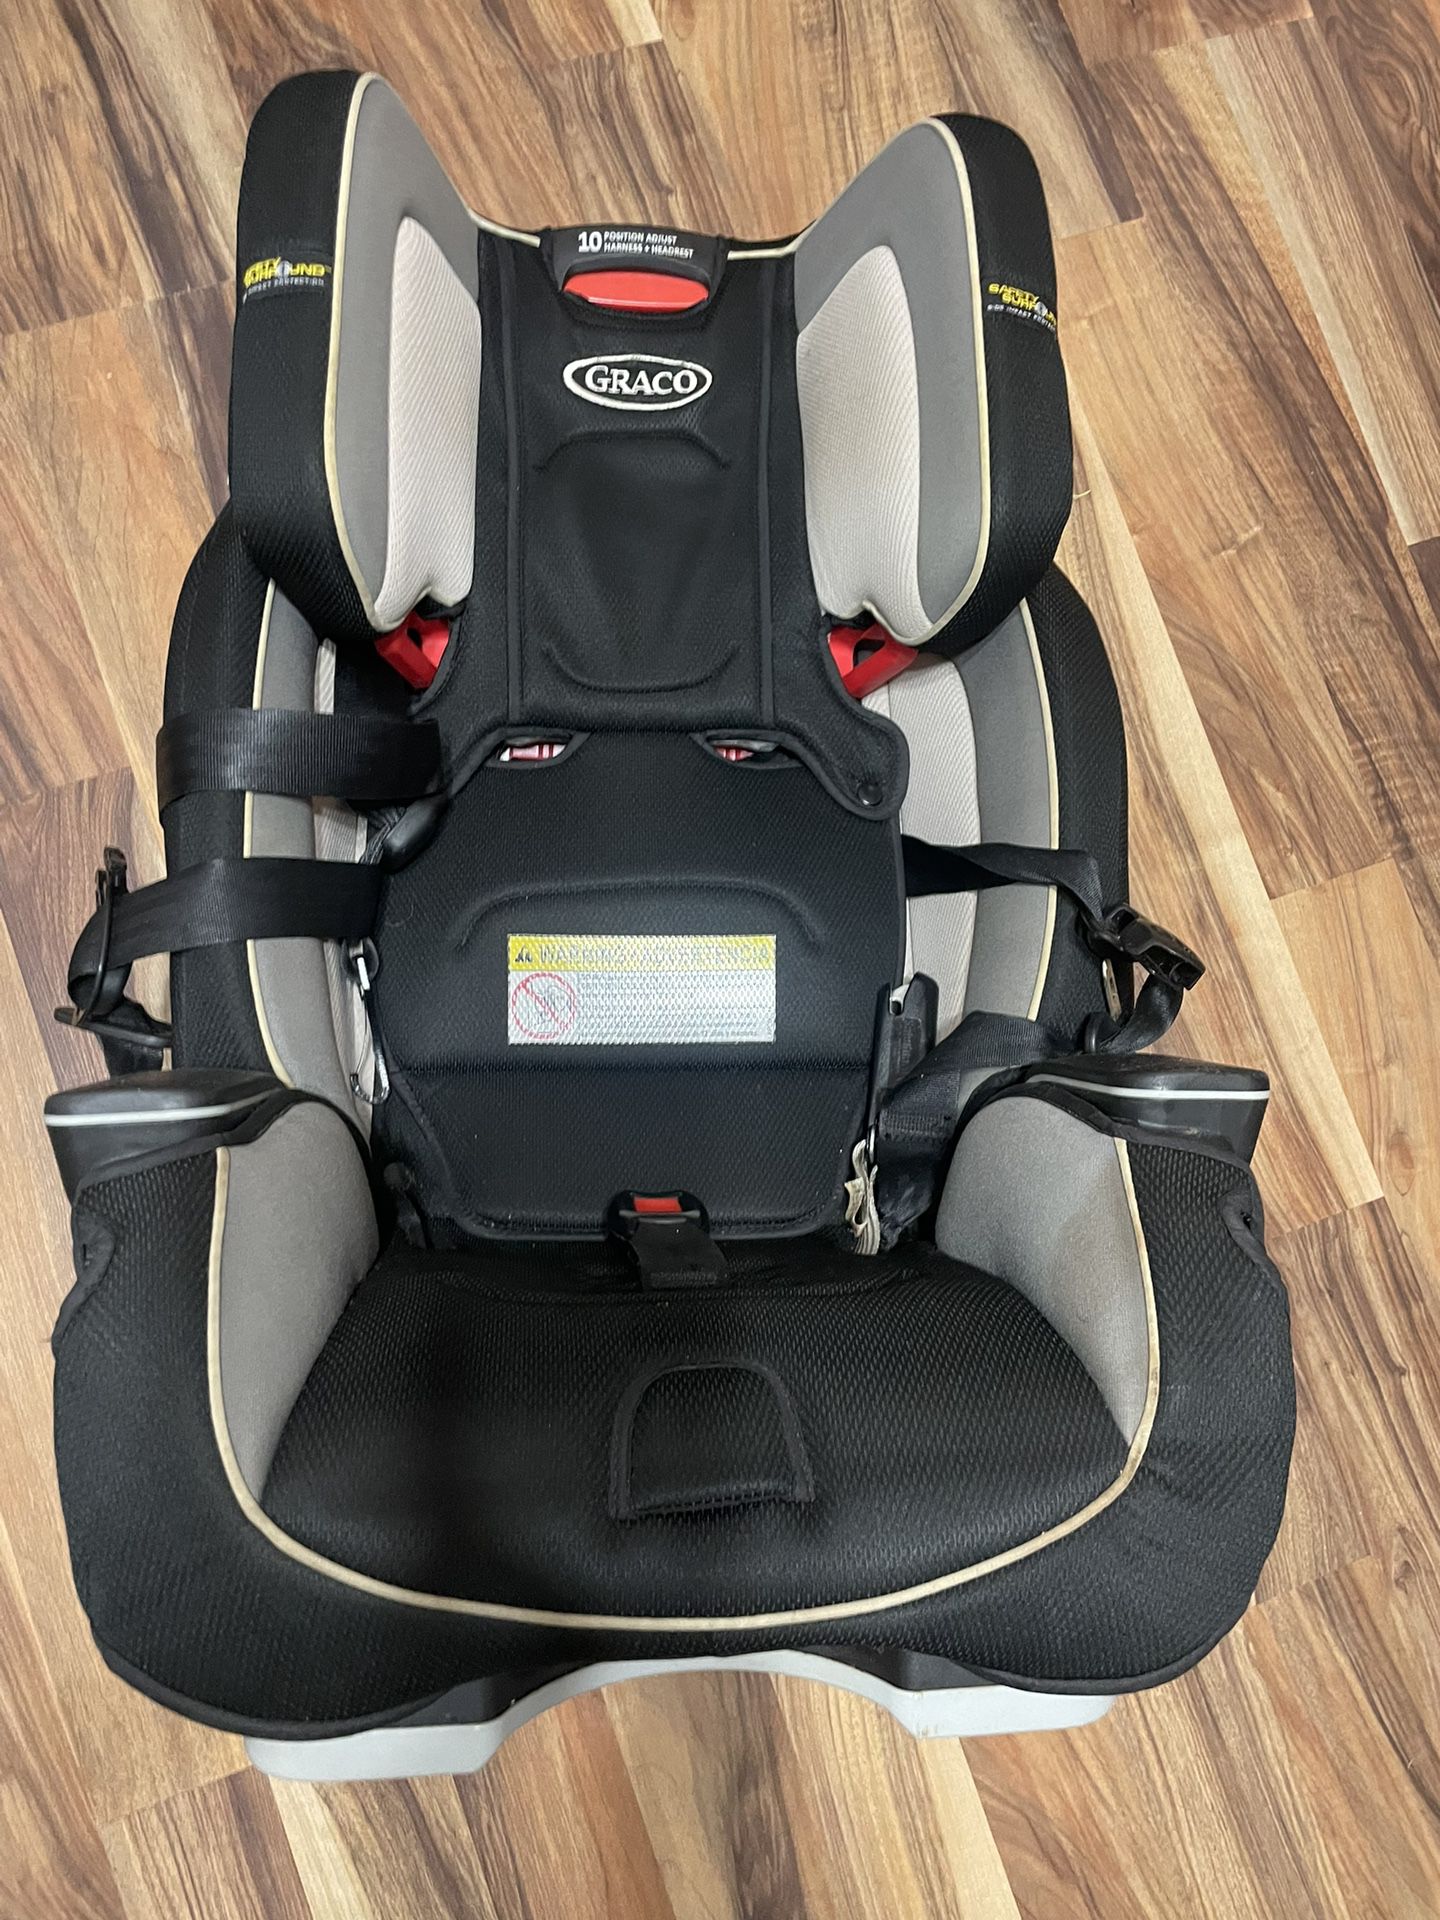 Graco Adjustable Car Seat/ Booster Seat